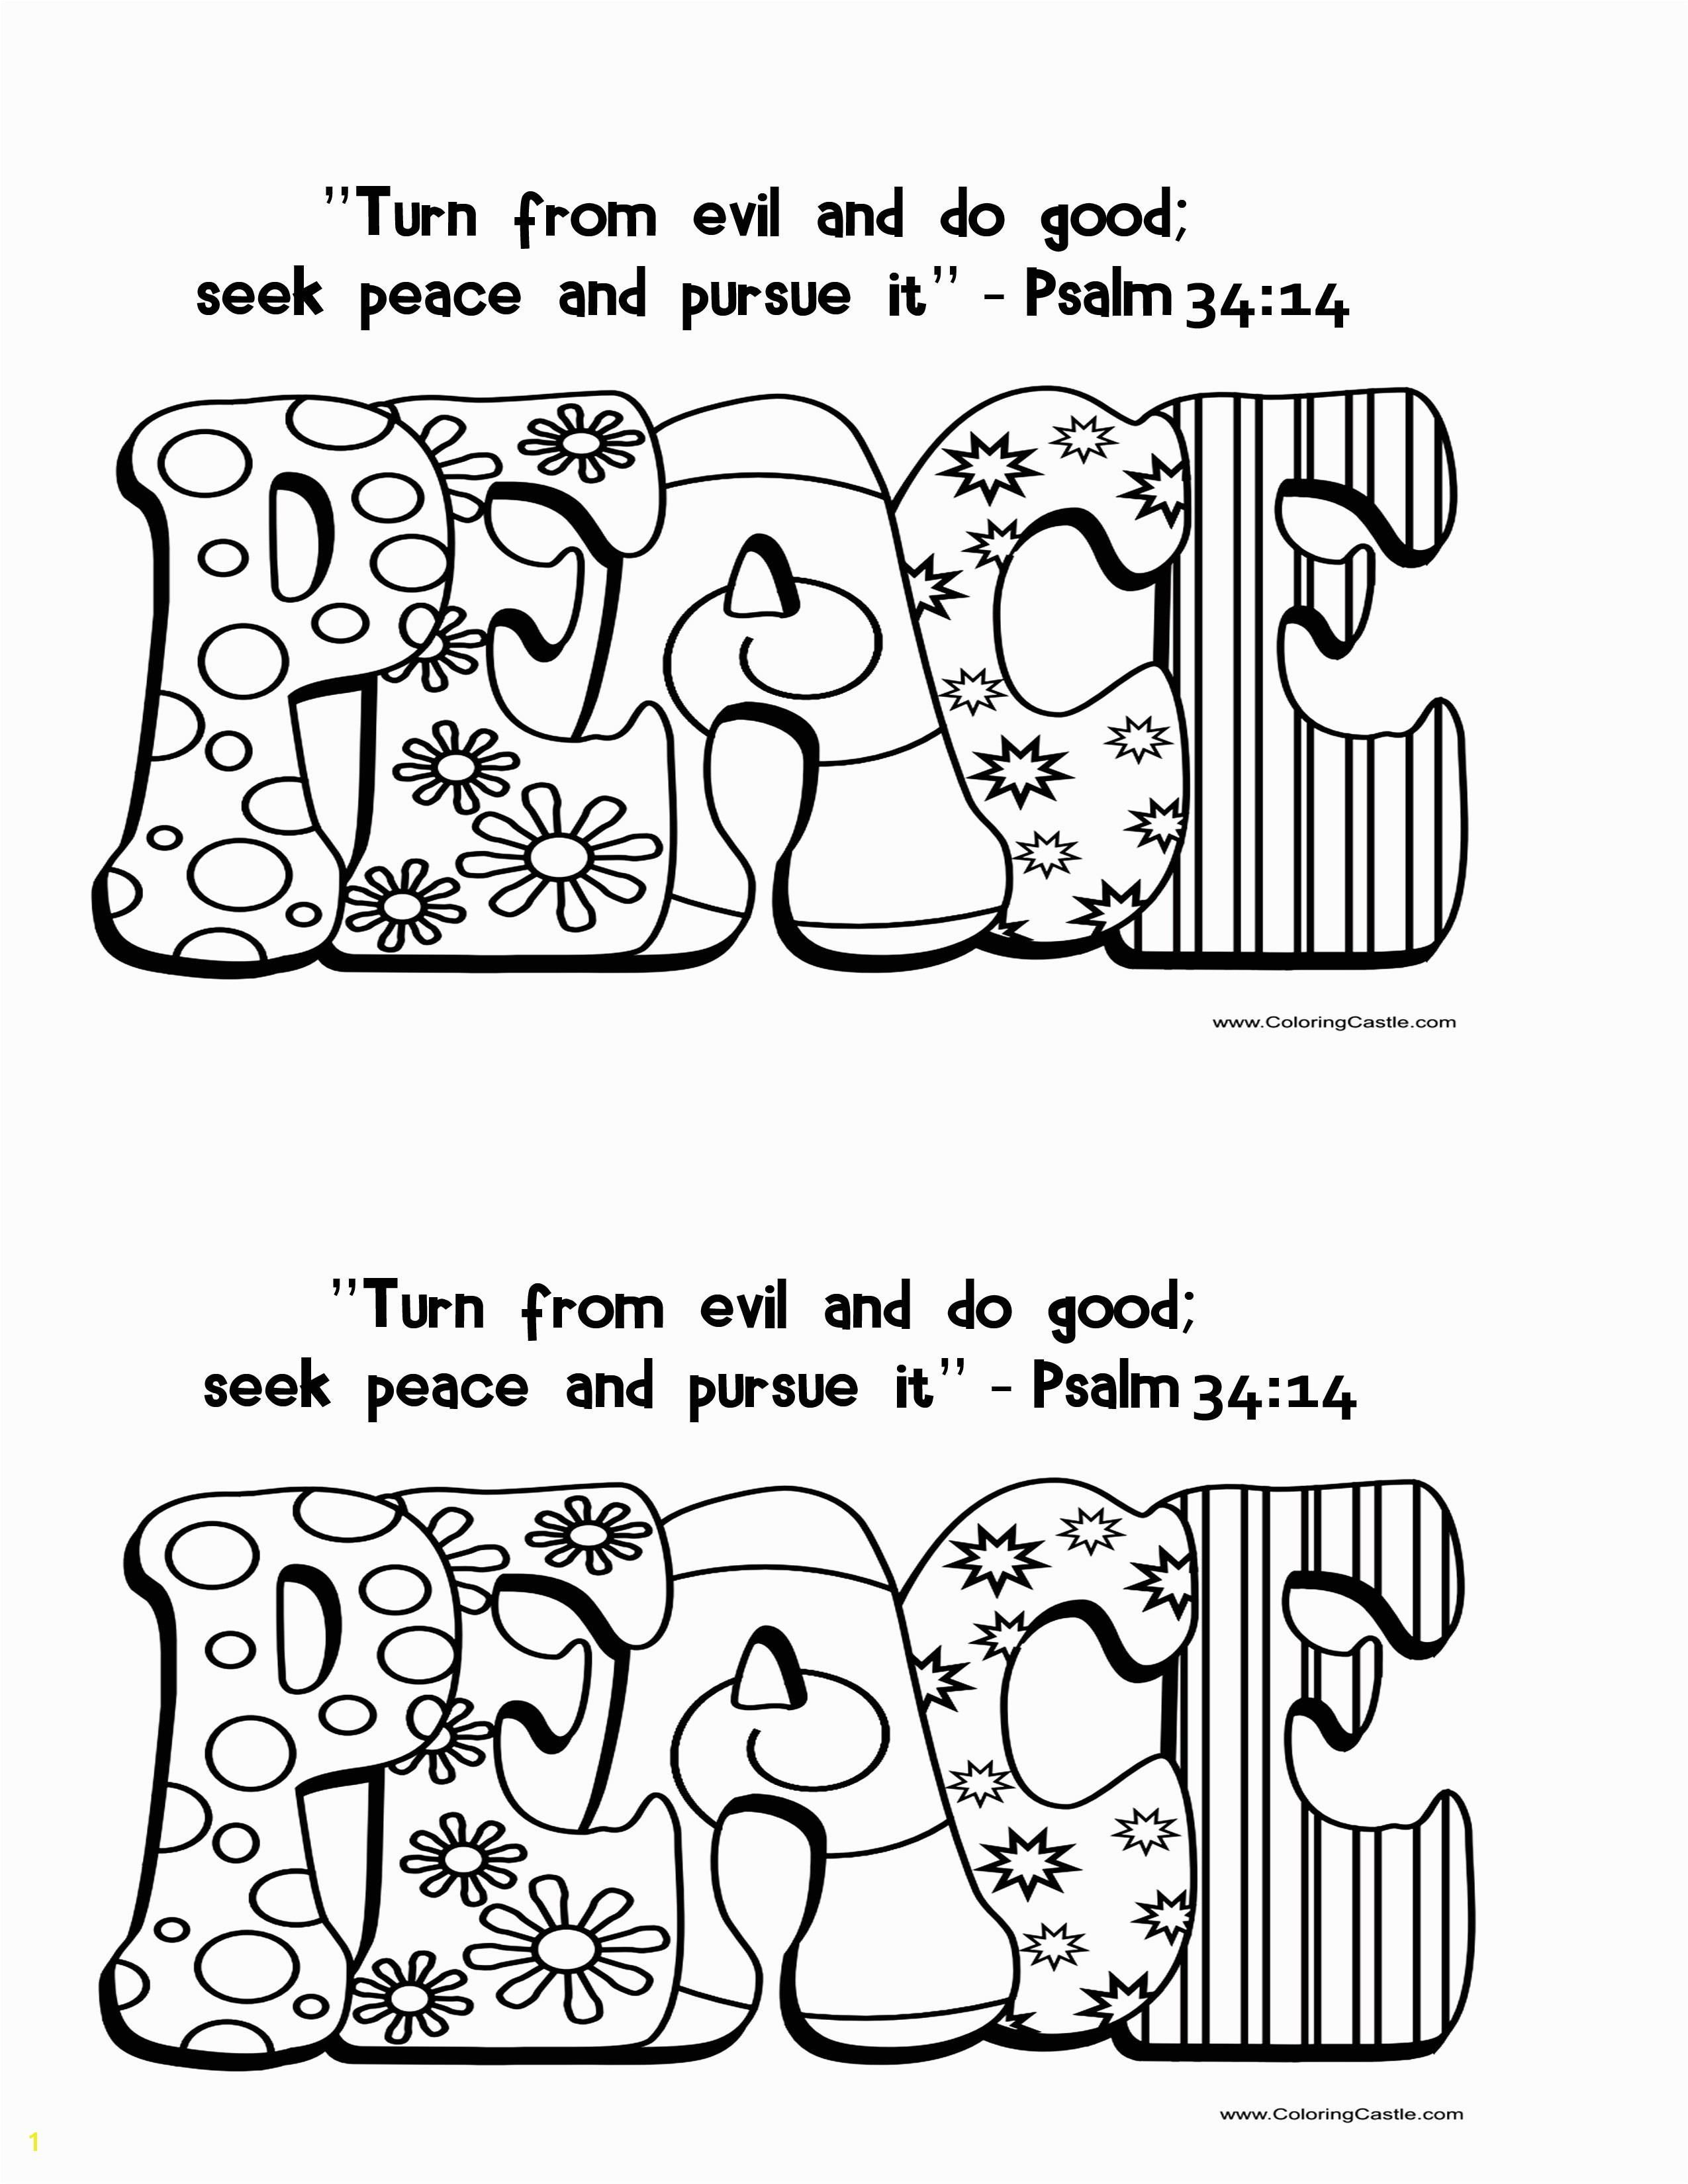 Fruit Of the Spirit Coloring Pages Fruit the Spirit Coloring Page Unique Awesome Od Dog Coloring